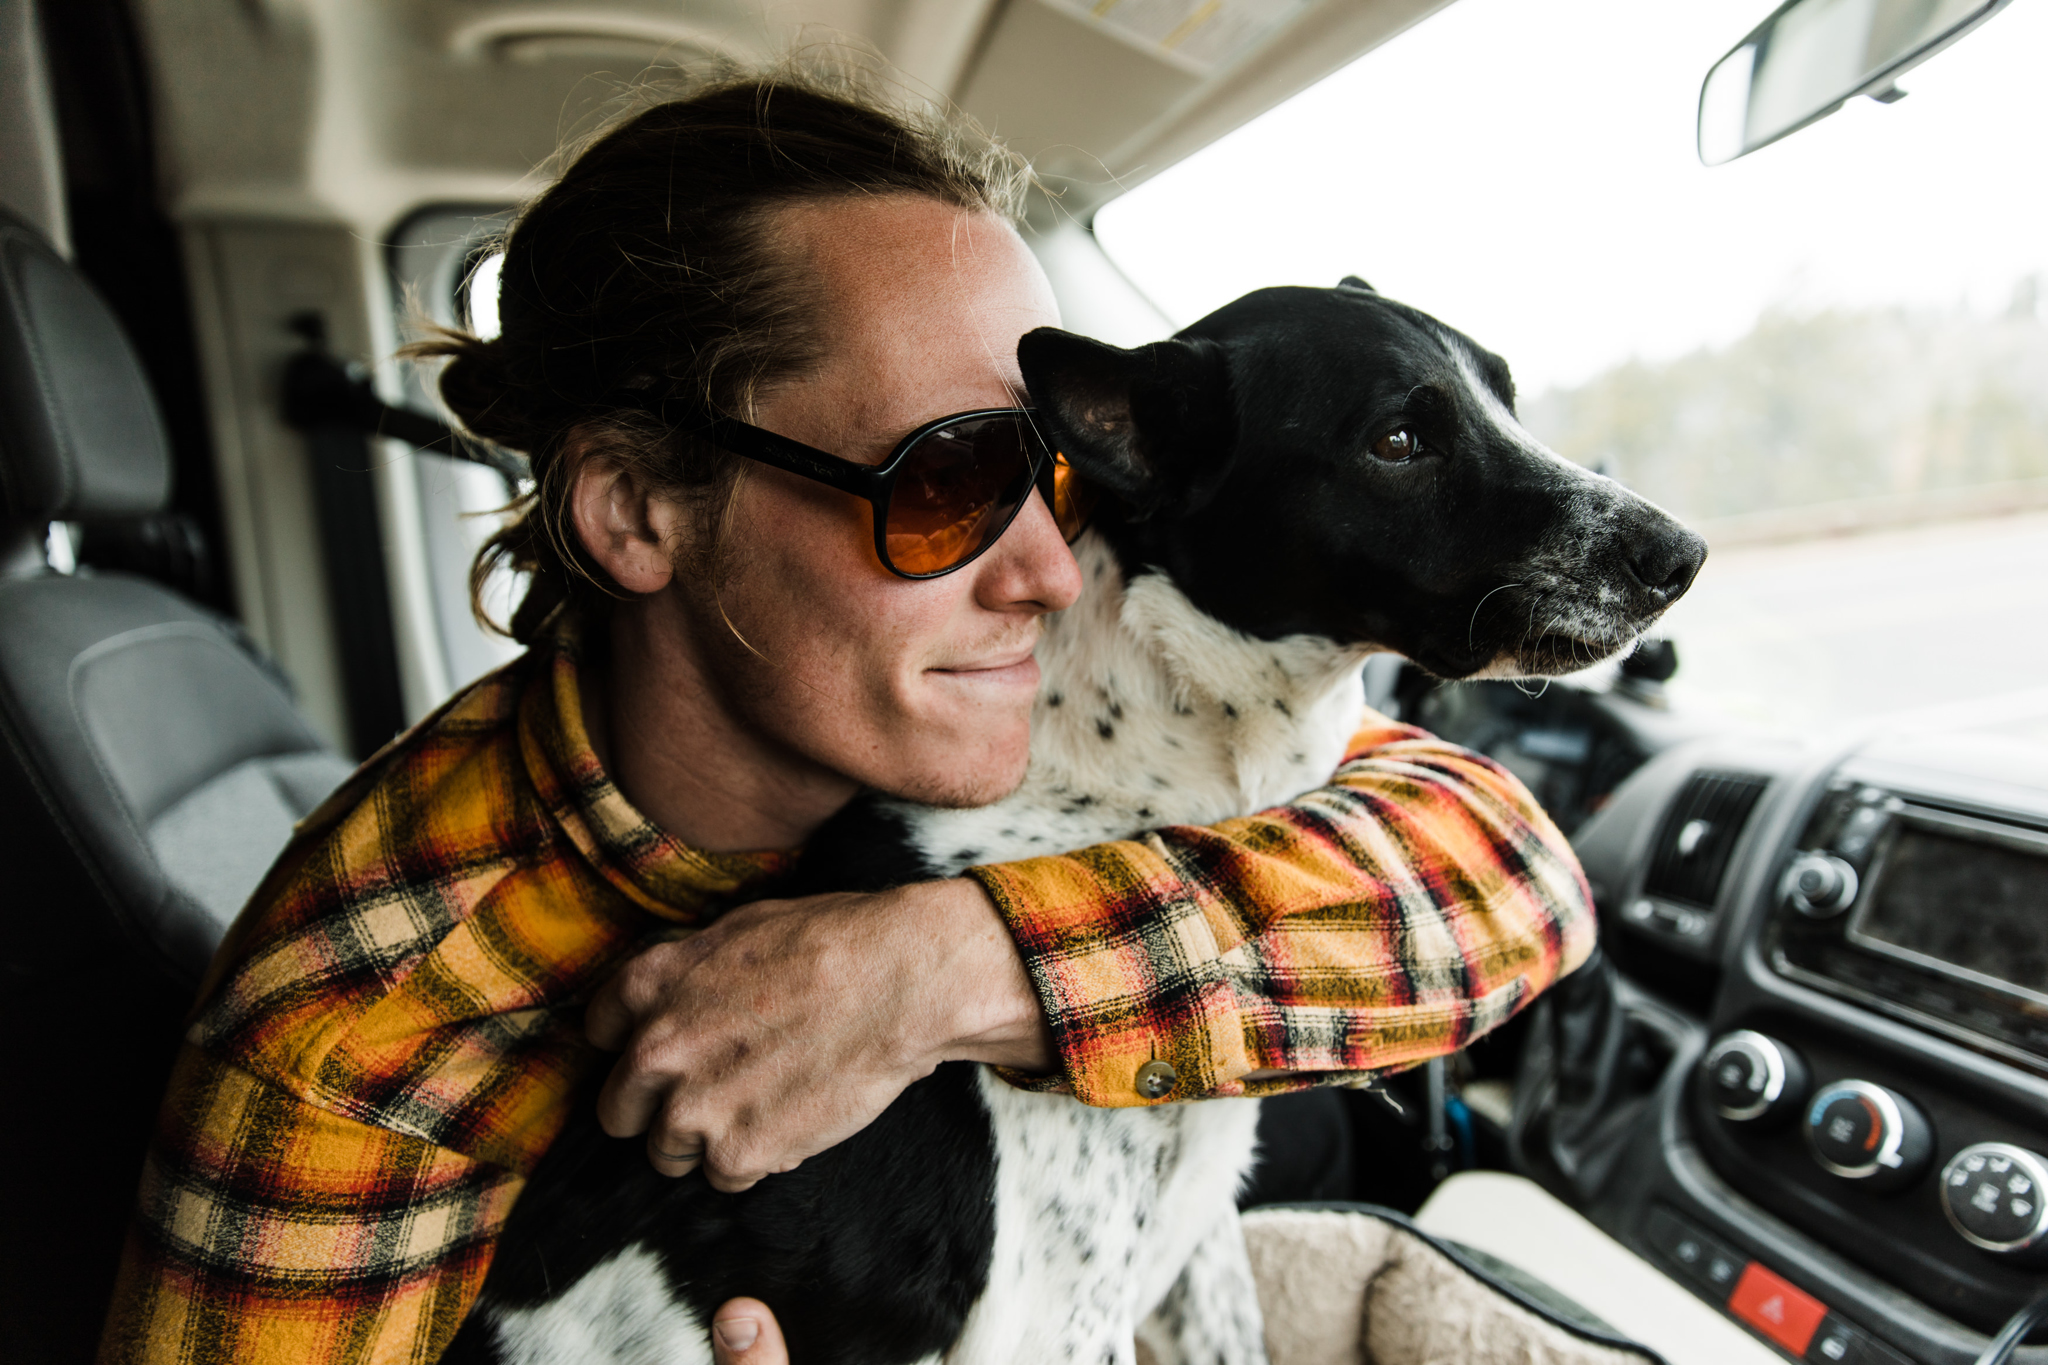 vanlife with a dog | utah and california adventure elopement photographers | the hearnes adventure photography | www.thehearnes.com